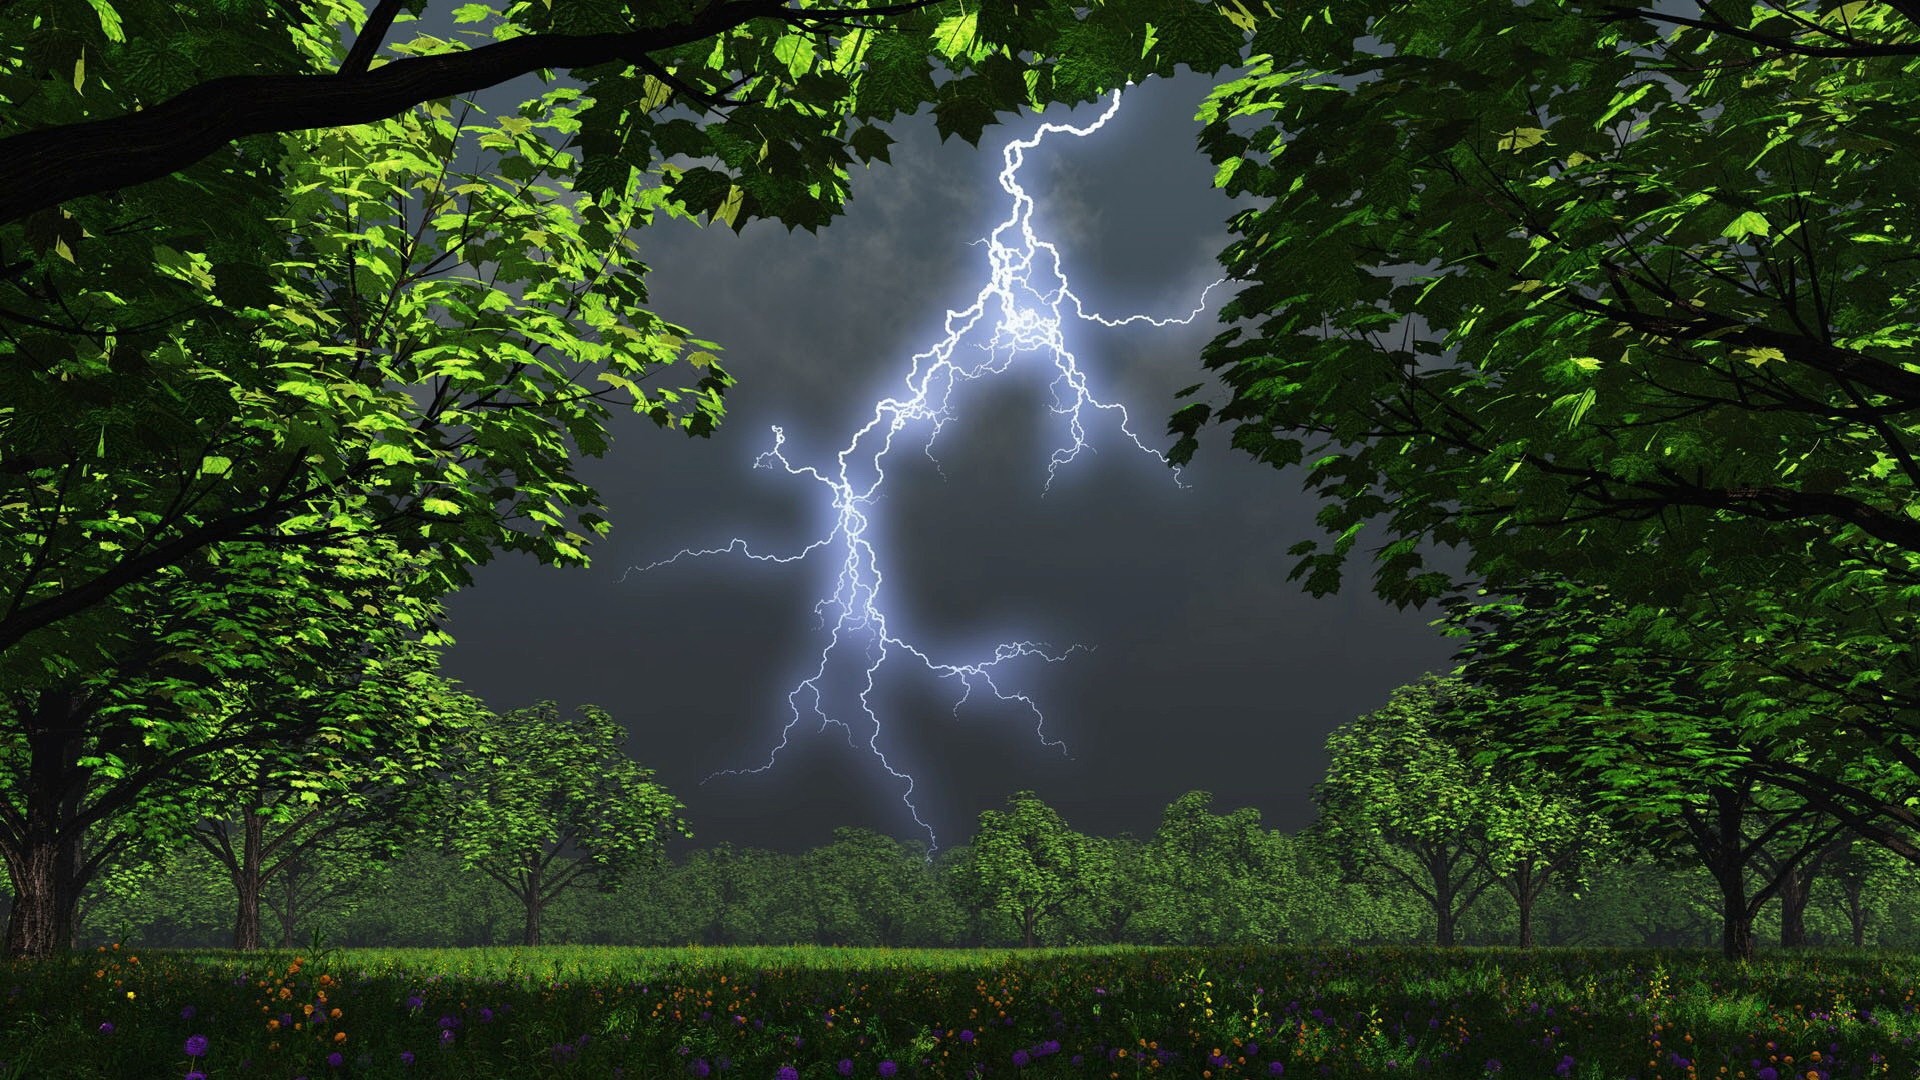 Lightning Storm Wallpaper And Image Pictures Photos